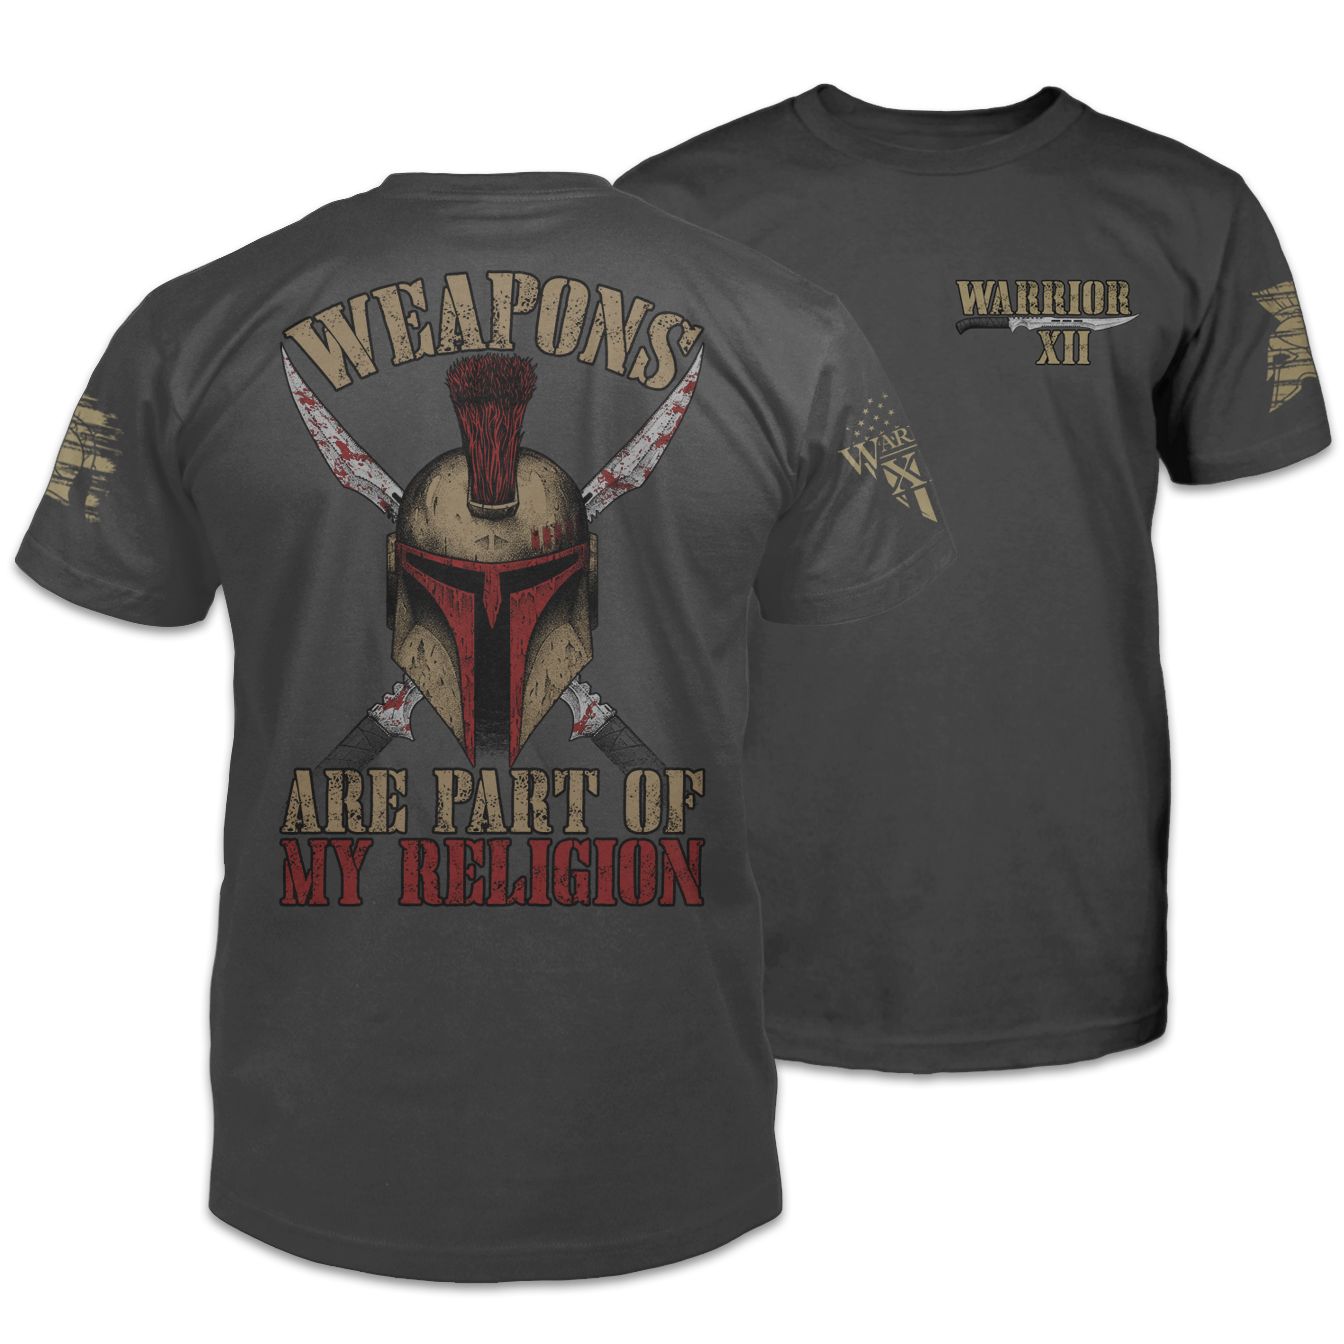 Front and back dark grey t-shirt with the words "Weapons are part of my religion" with a spartan helmet printed on the shirt.